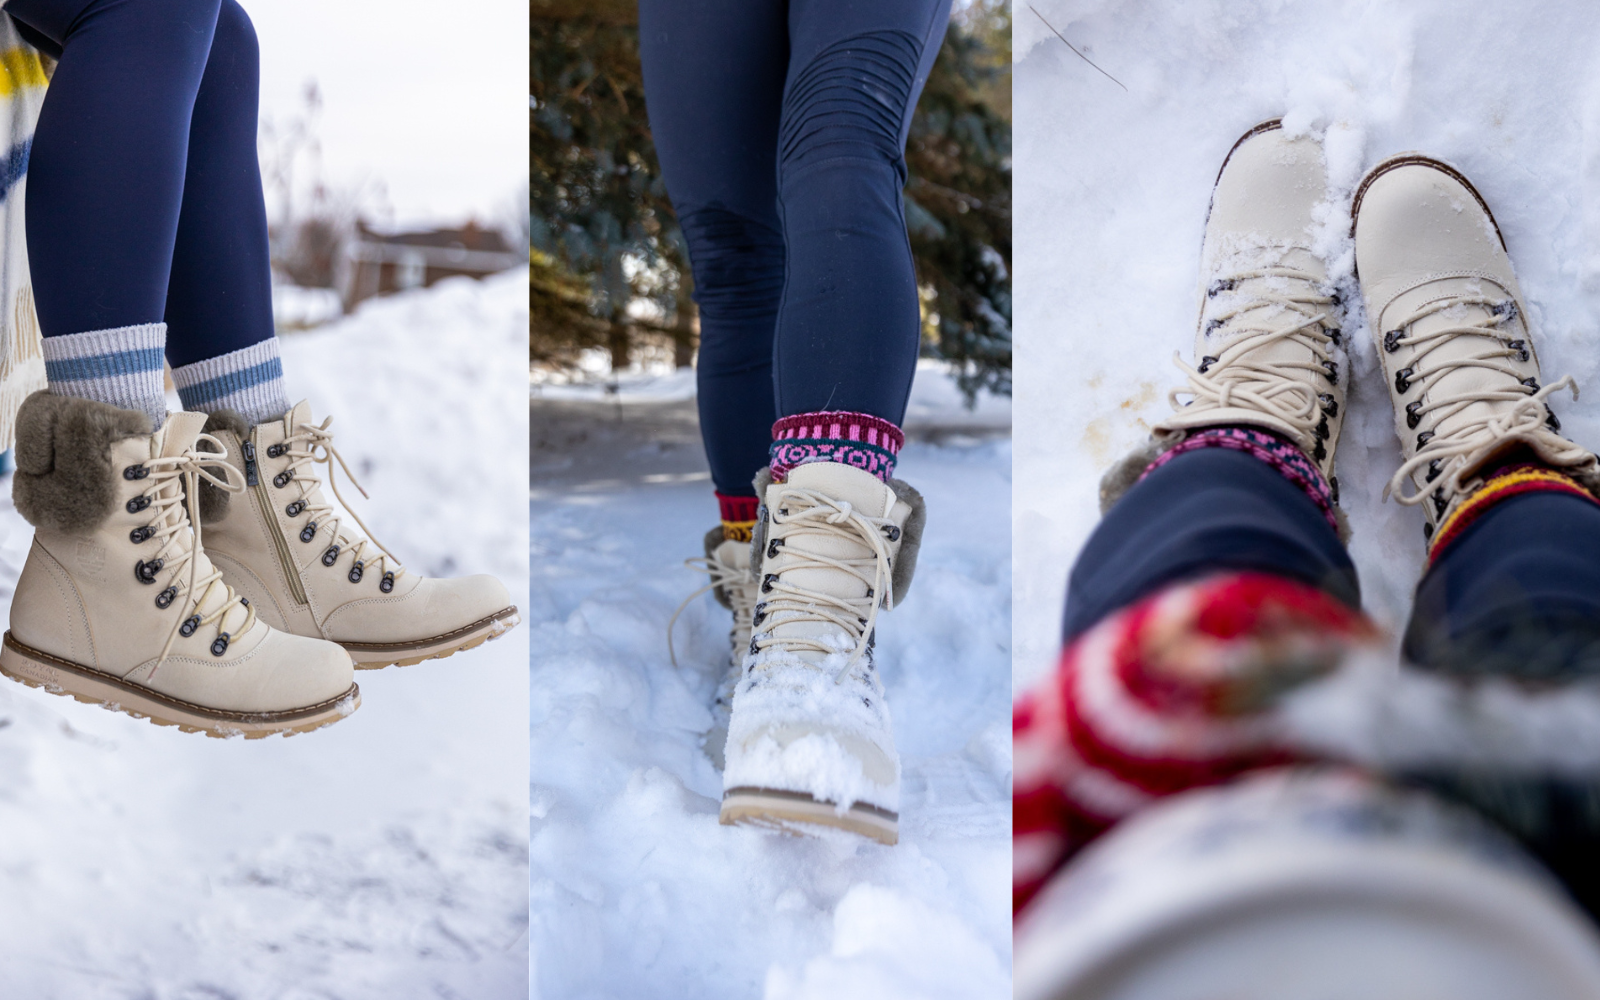 Winter Boots vs. Snow Boots: Know the Difference